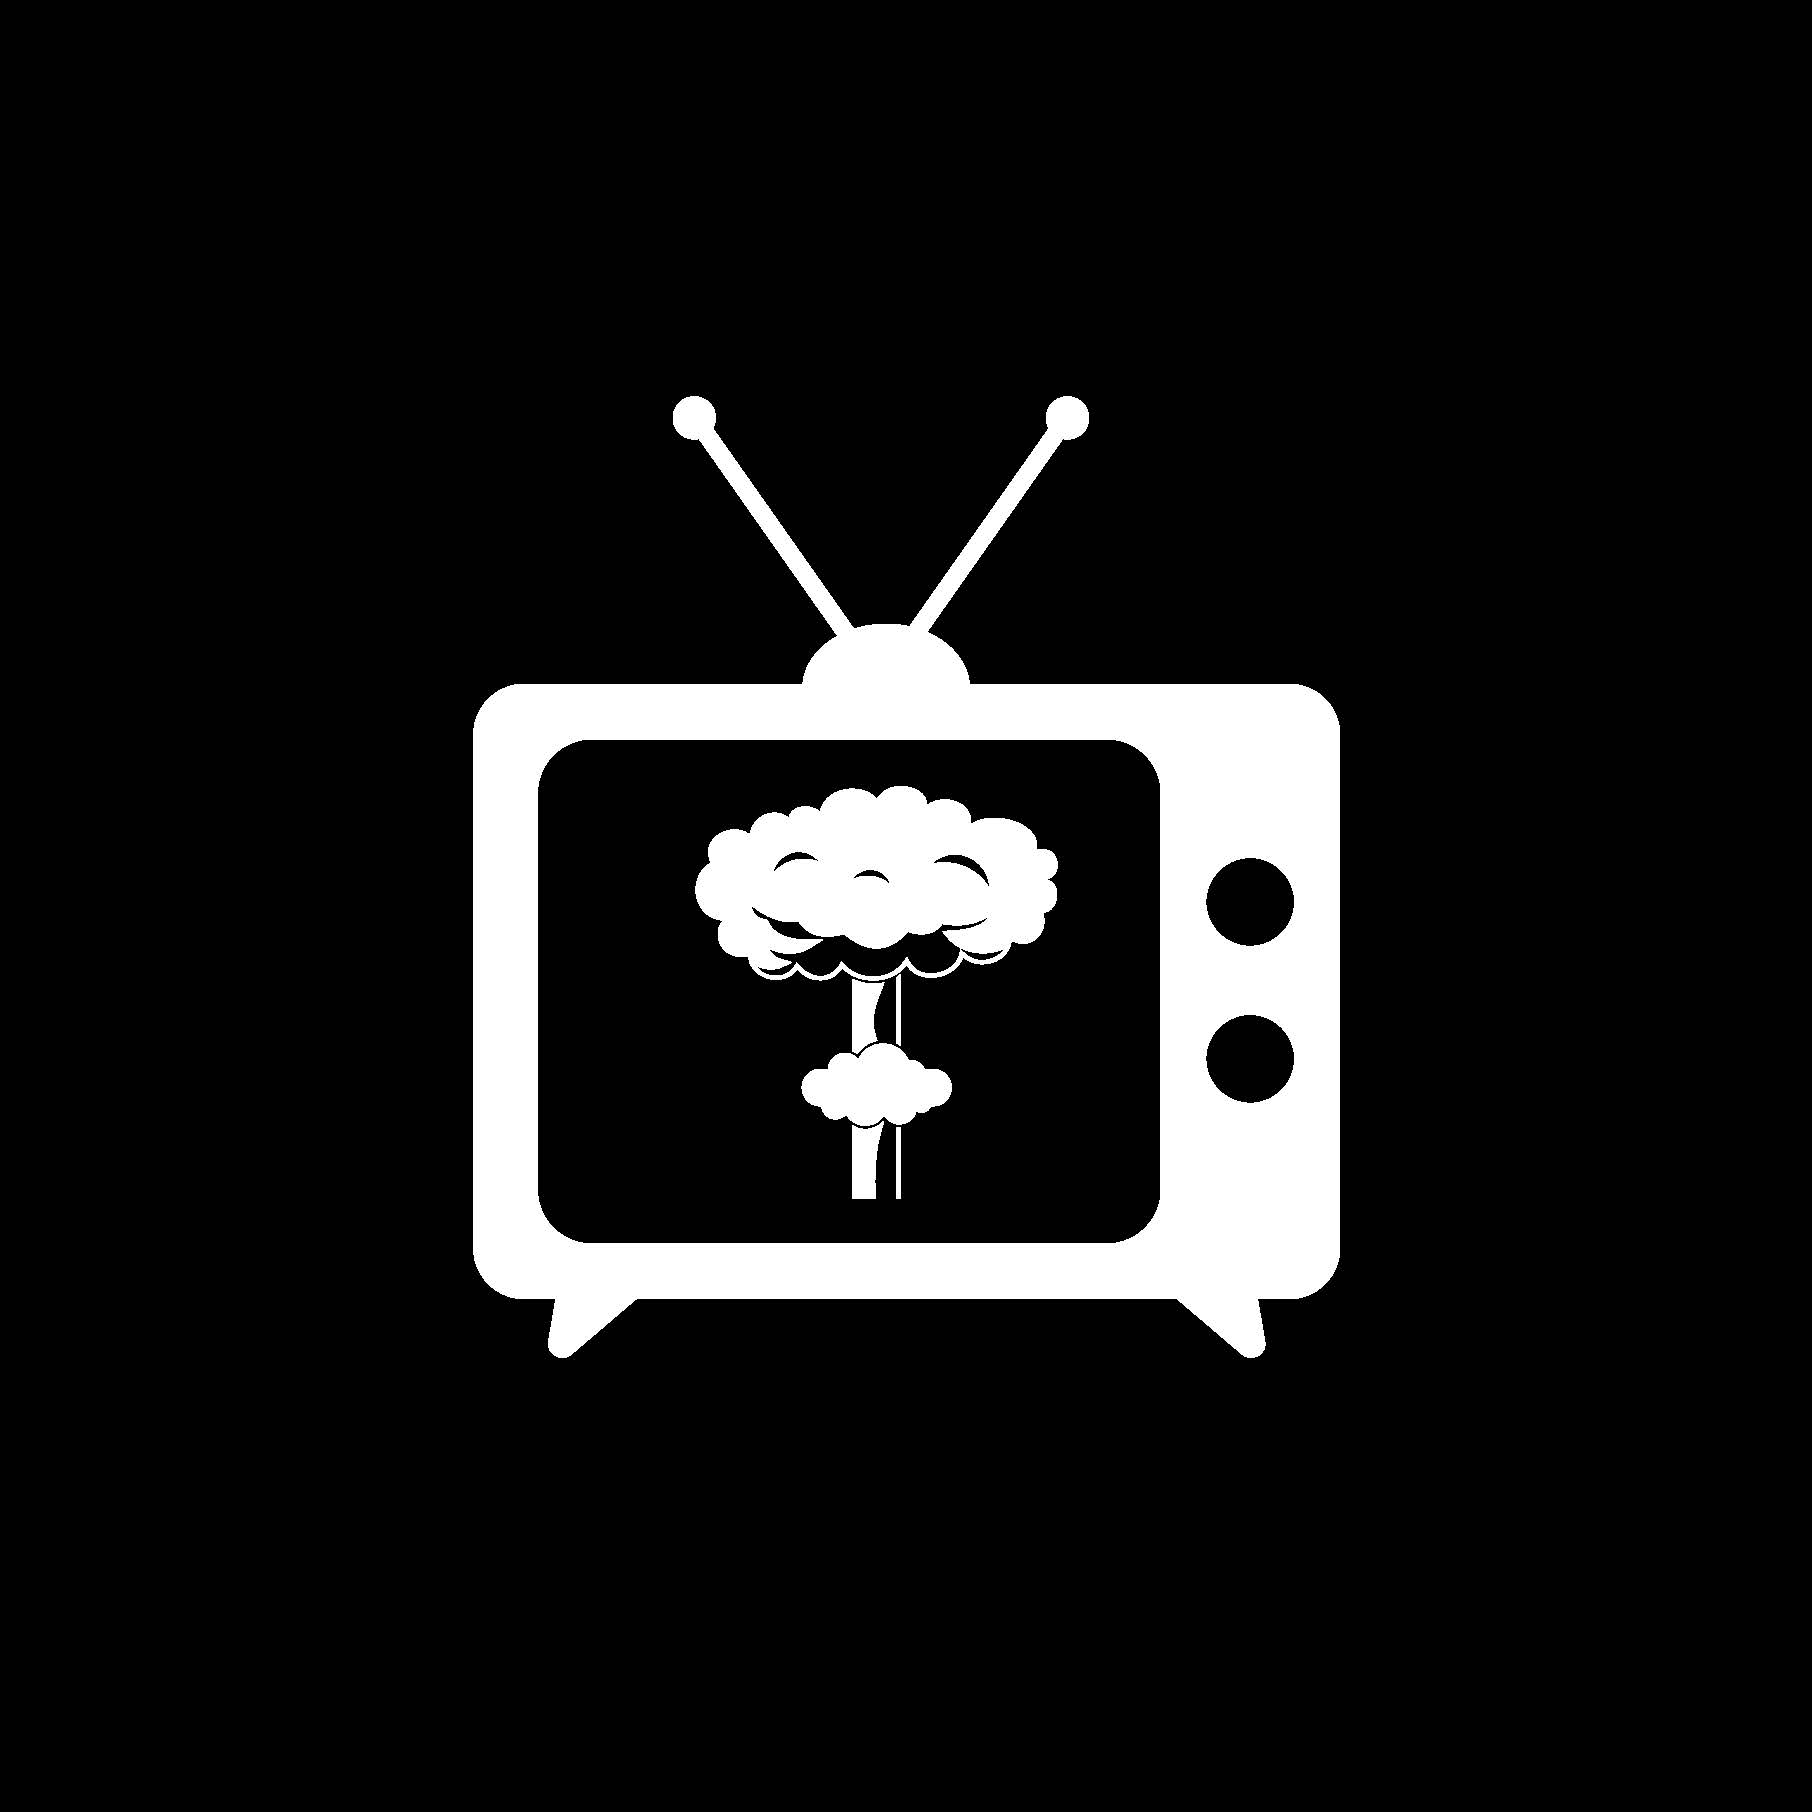 Image of black and white graphic from the Mind Blown publication depicting a TV with a nuclear cloud of smoke.jpg